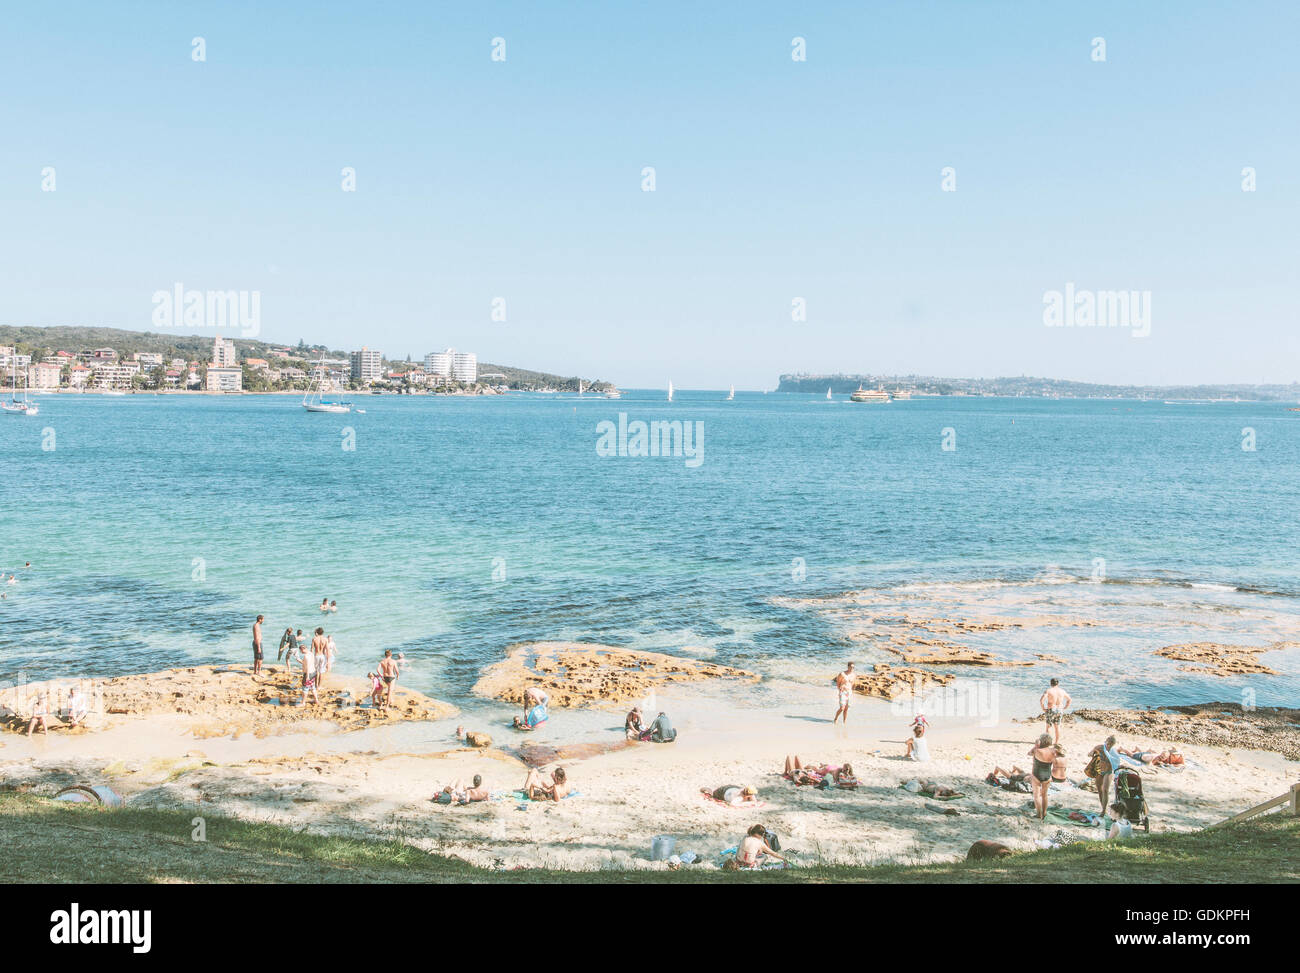 Manly, Sydney, New South Wales, Australia - November 11, 2013 People relaxing at the beach. Stock Photo